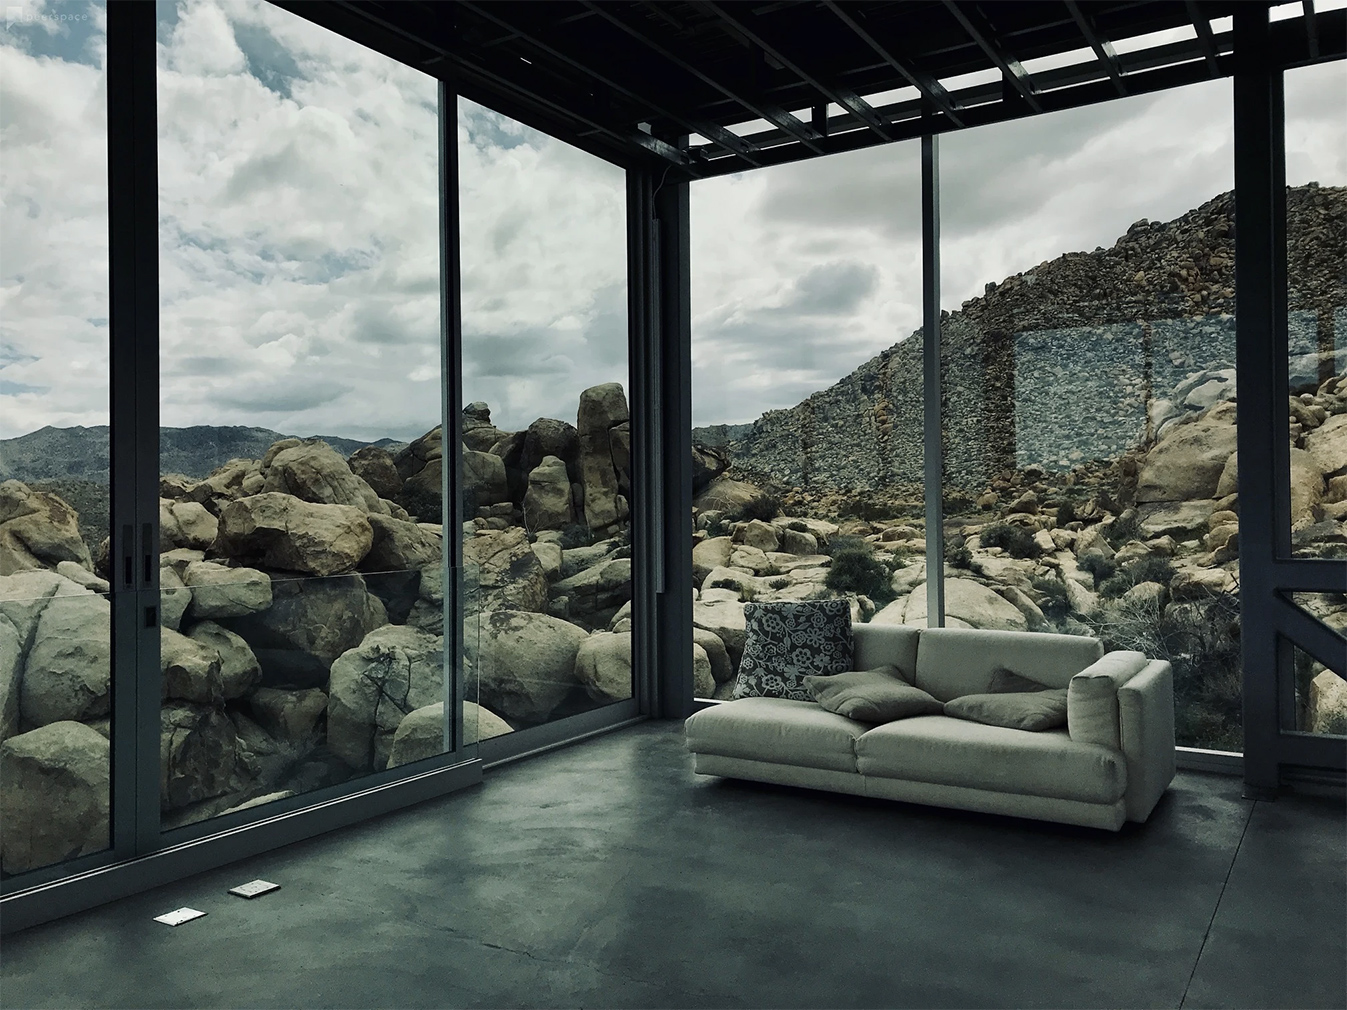 Invisible House reflects the Californian desert from its mirror-clad walls